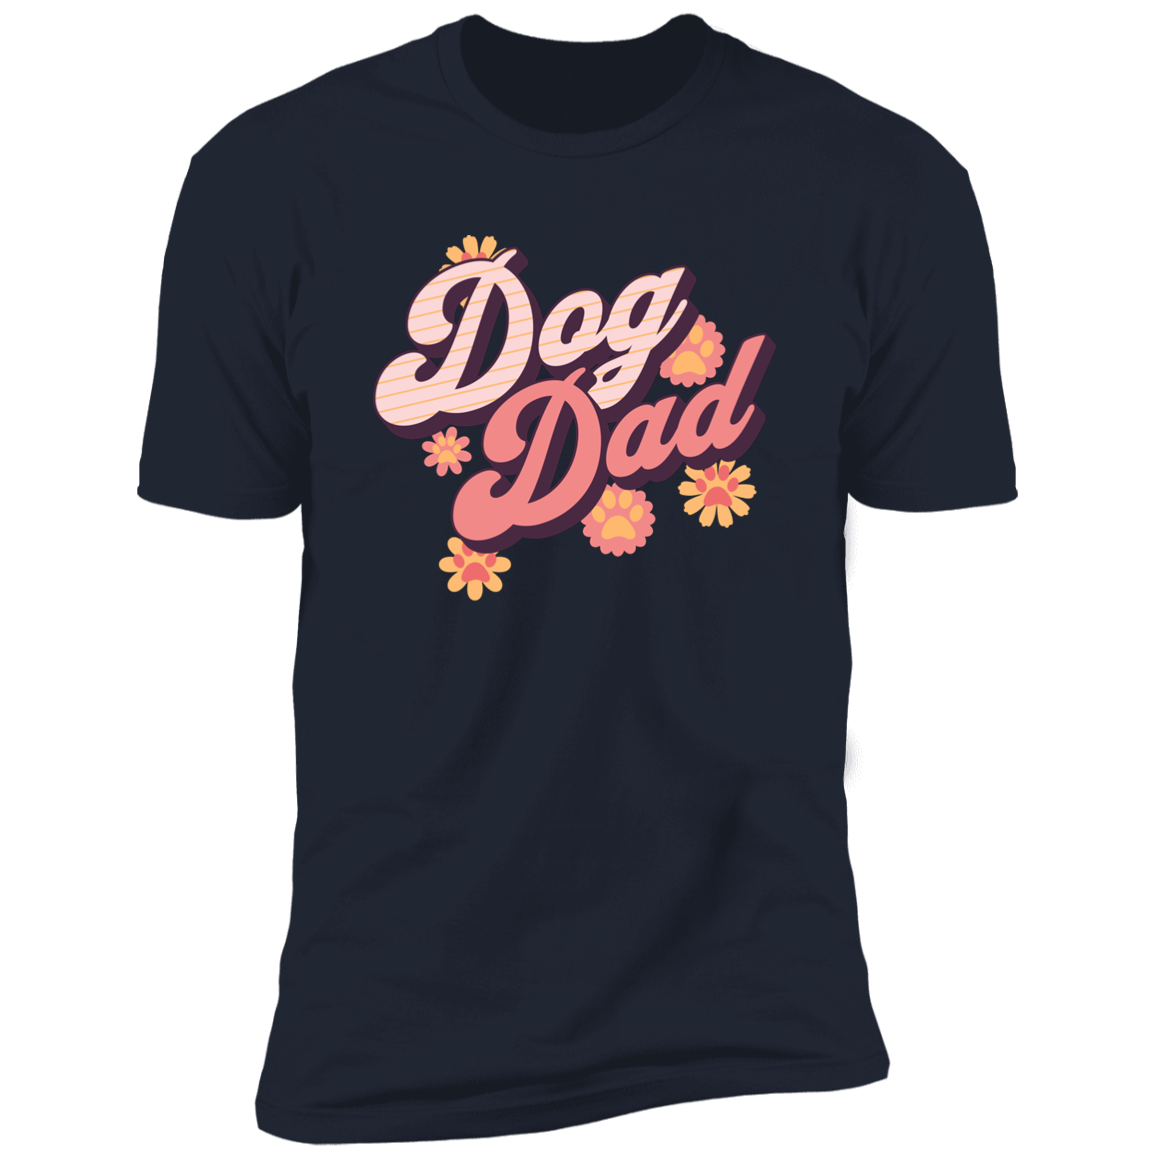 Retro Dog Dad t-shirt, Dog dad shirt, Dog T-shirt for humans, in navy blue